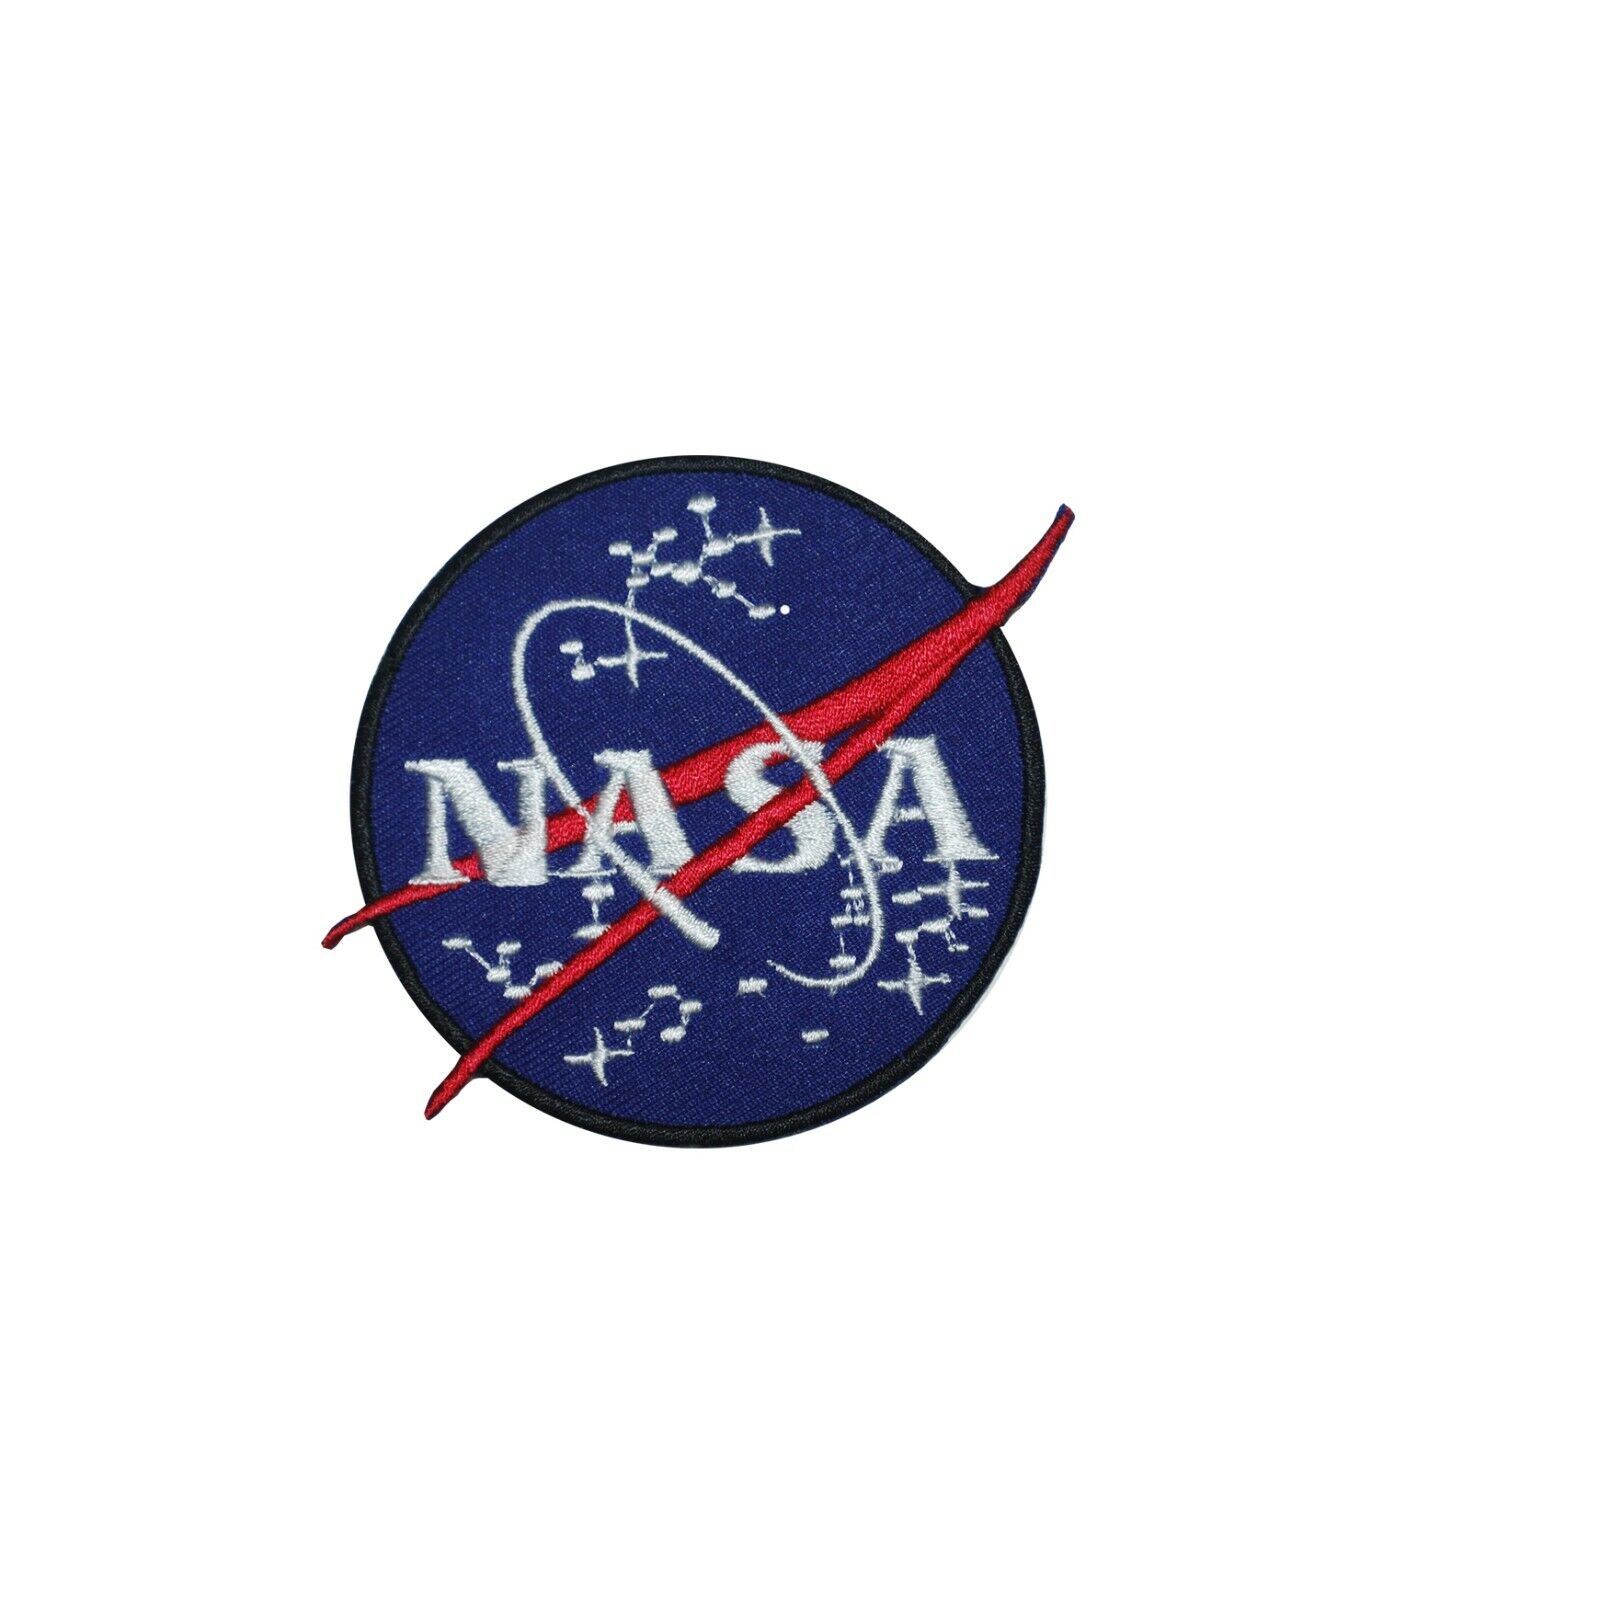 Nasa Blue Circle Iron on Patch Sew On Badge Embroidered Cloth Patch